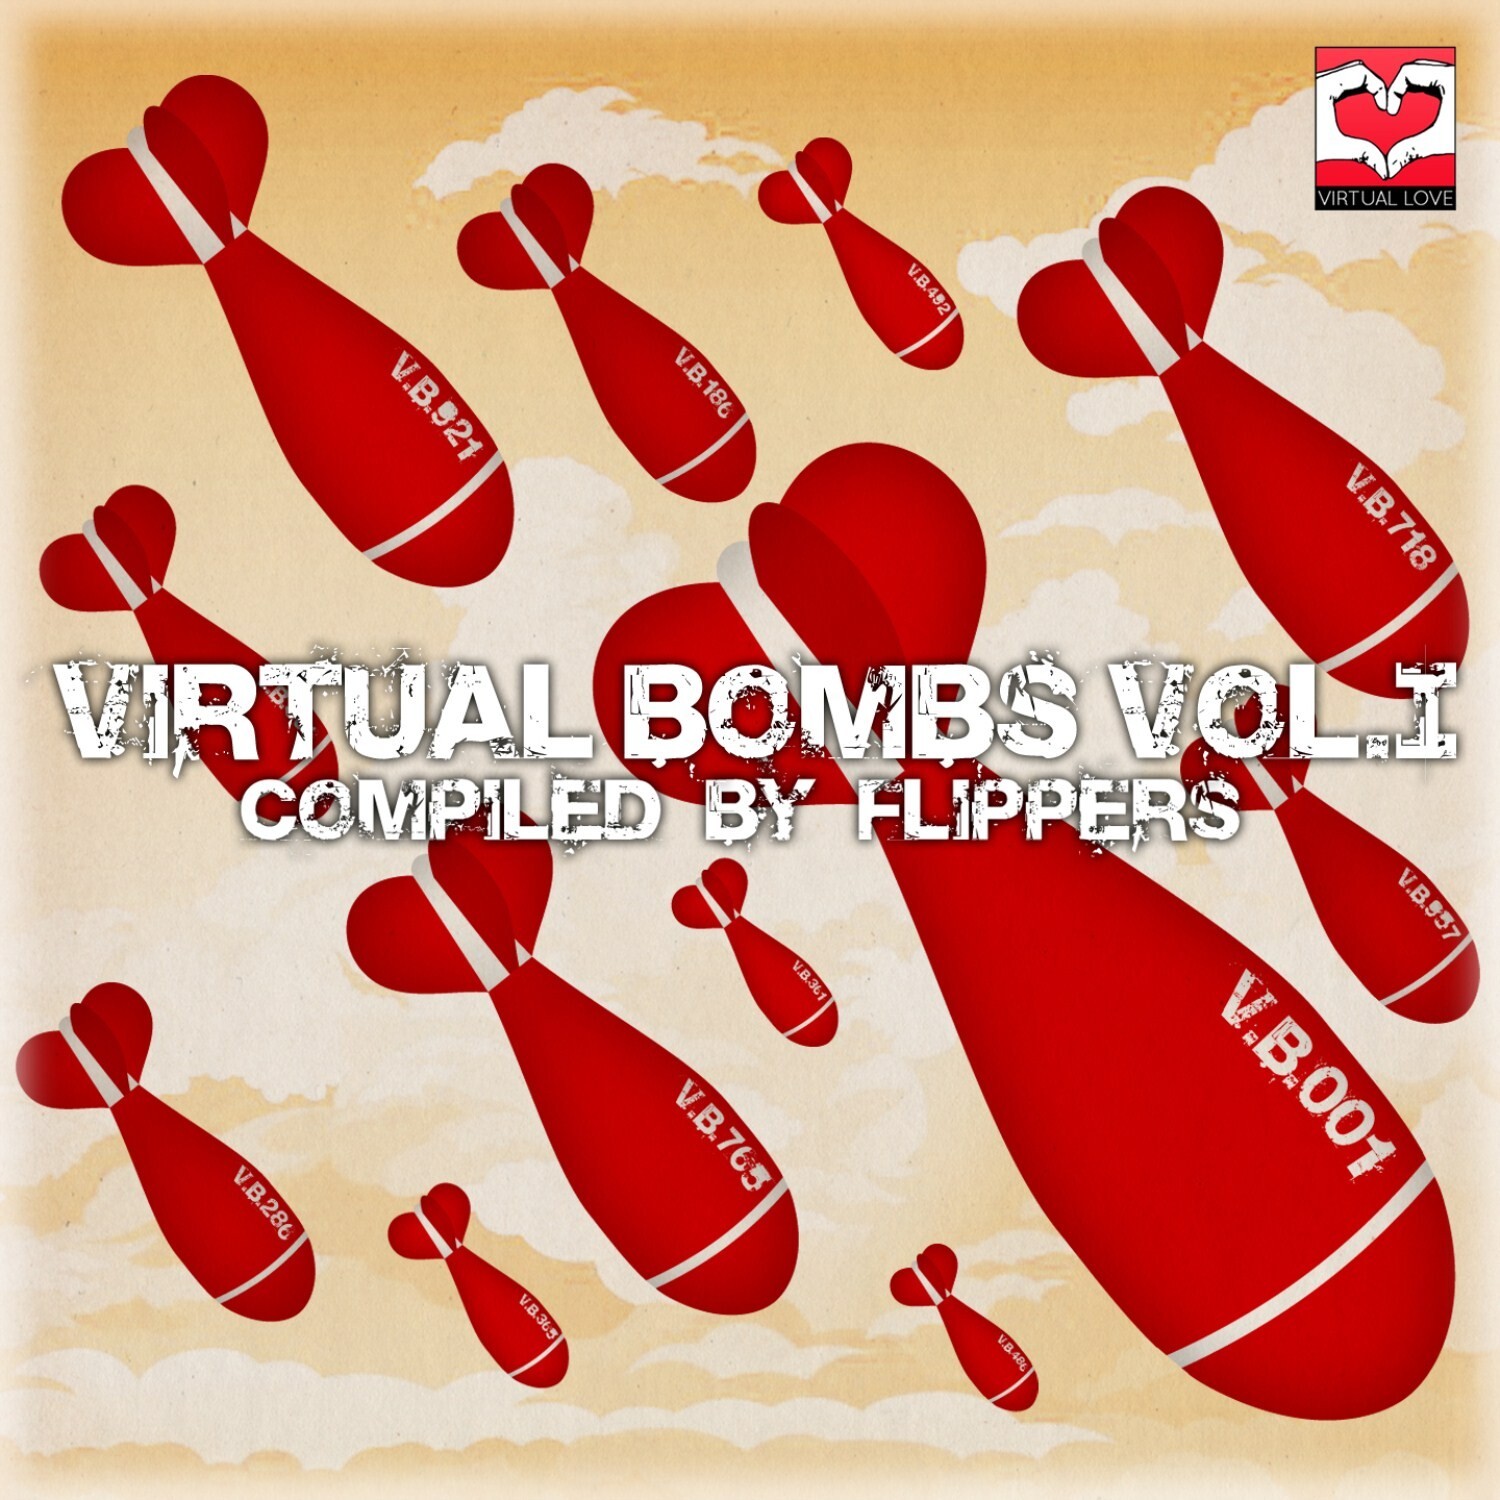 Virtual Bombs, Vol. 1 (Compiled by Flippers)